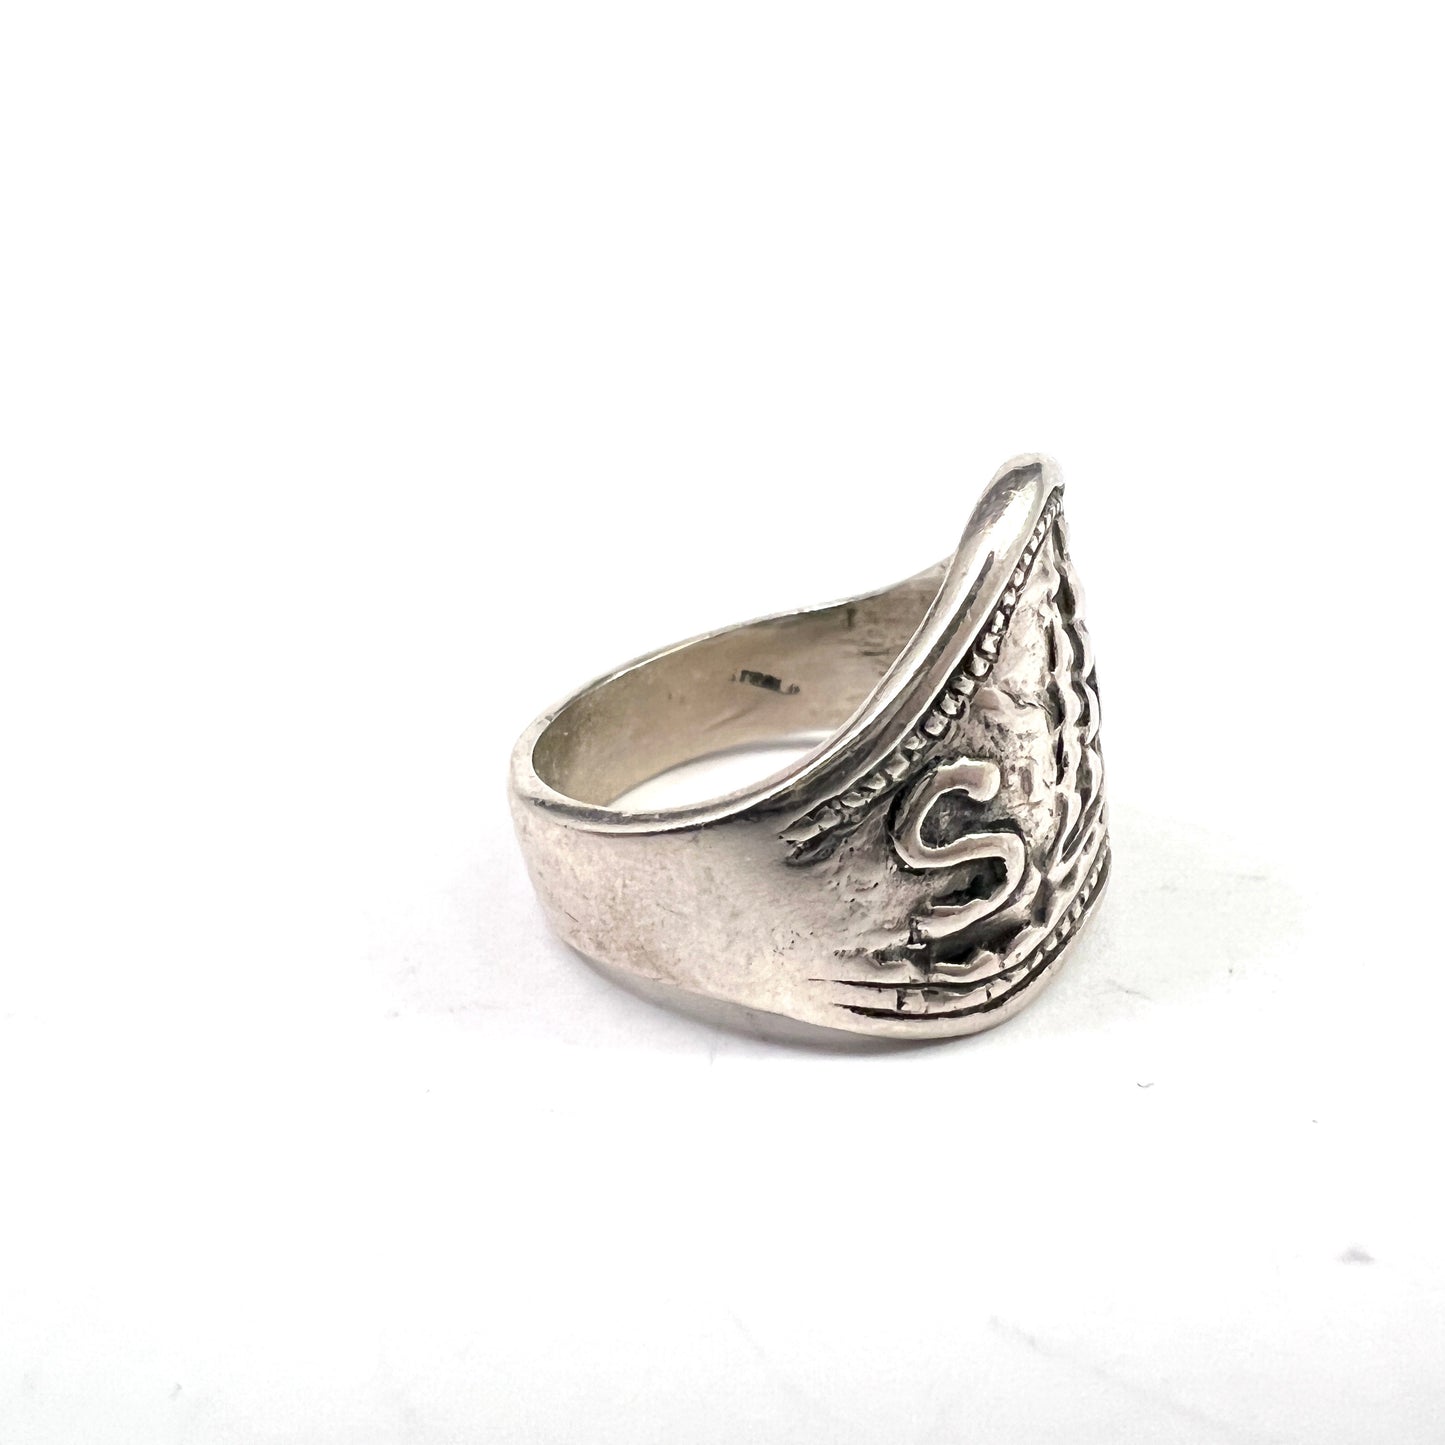 Antique c year 1900. Sterling Silver Novelty Ring.